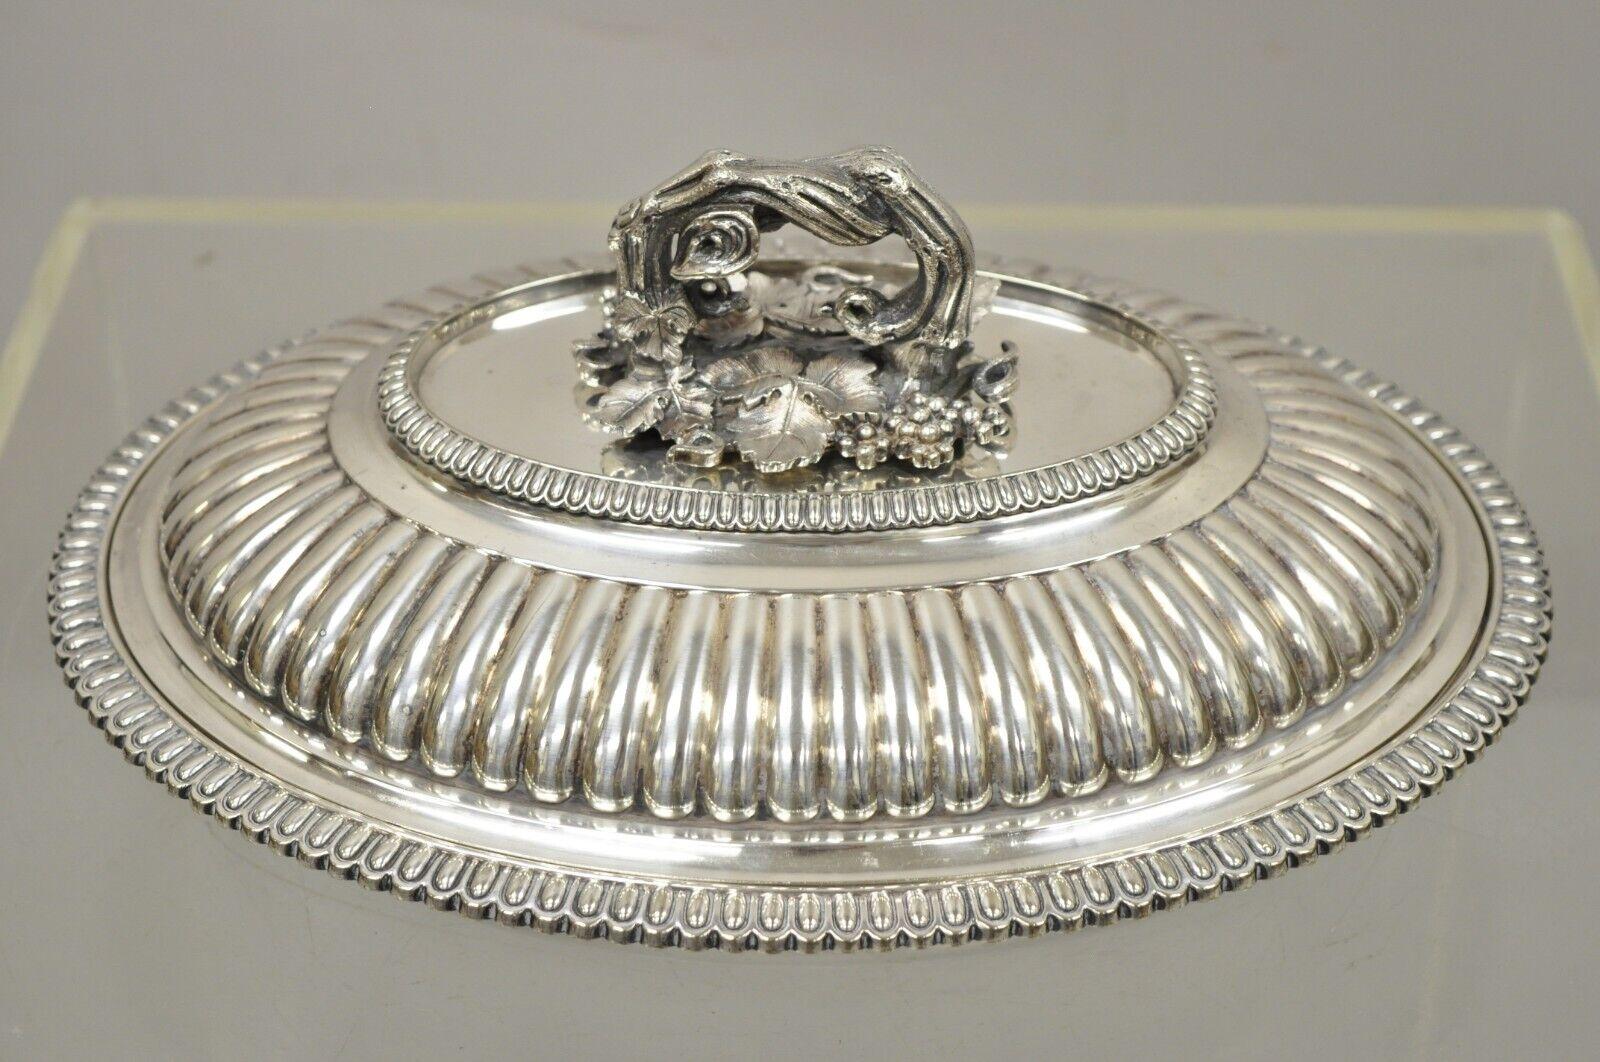 Antique English Neoclassical Style Elkington & Co Covered serving dish with Branch Grapevine Handle. Item features an extremely impressive removable branch and grapevine handle, ribbed dome, oval shape, very nice antique item. Circa Early 1900s.